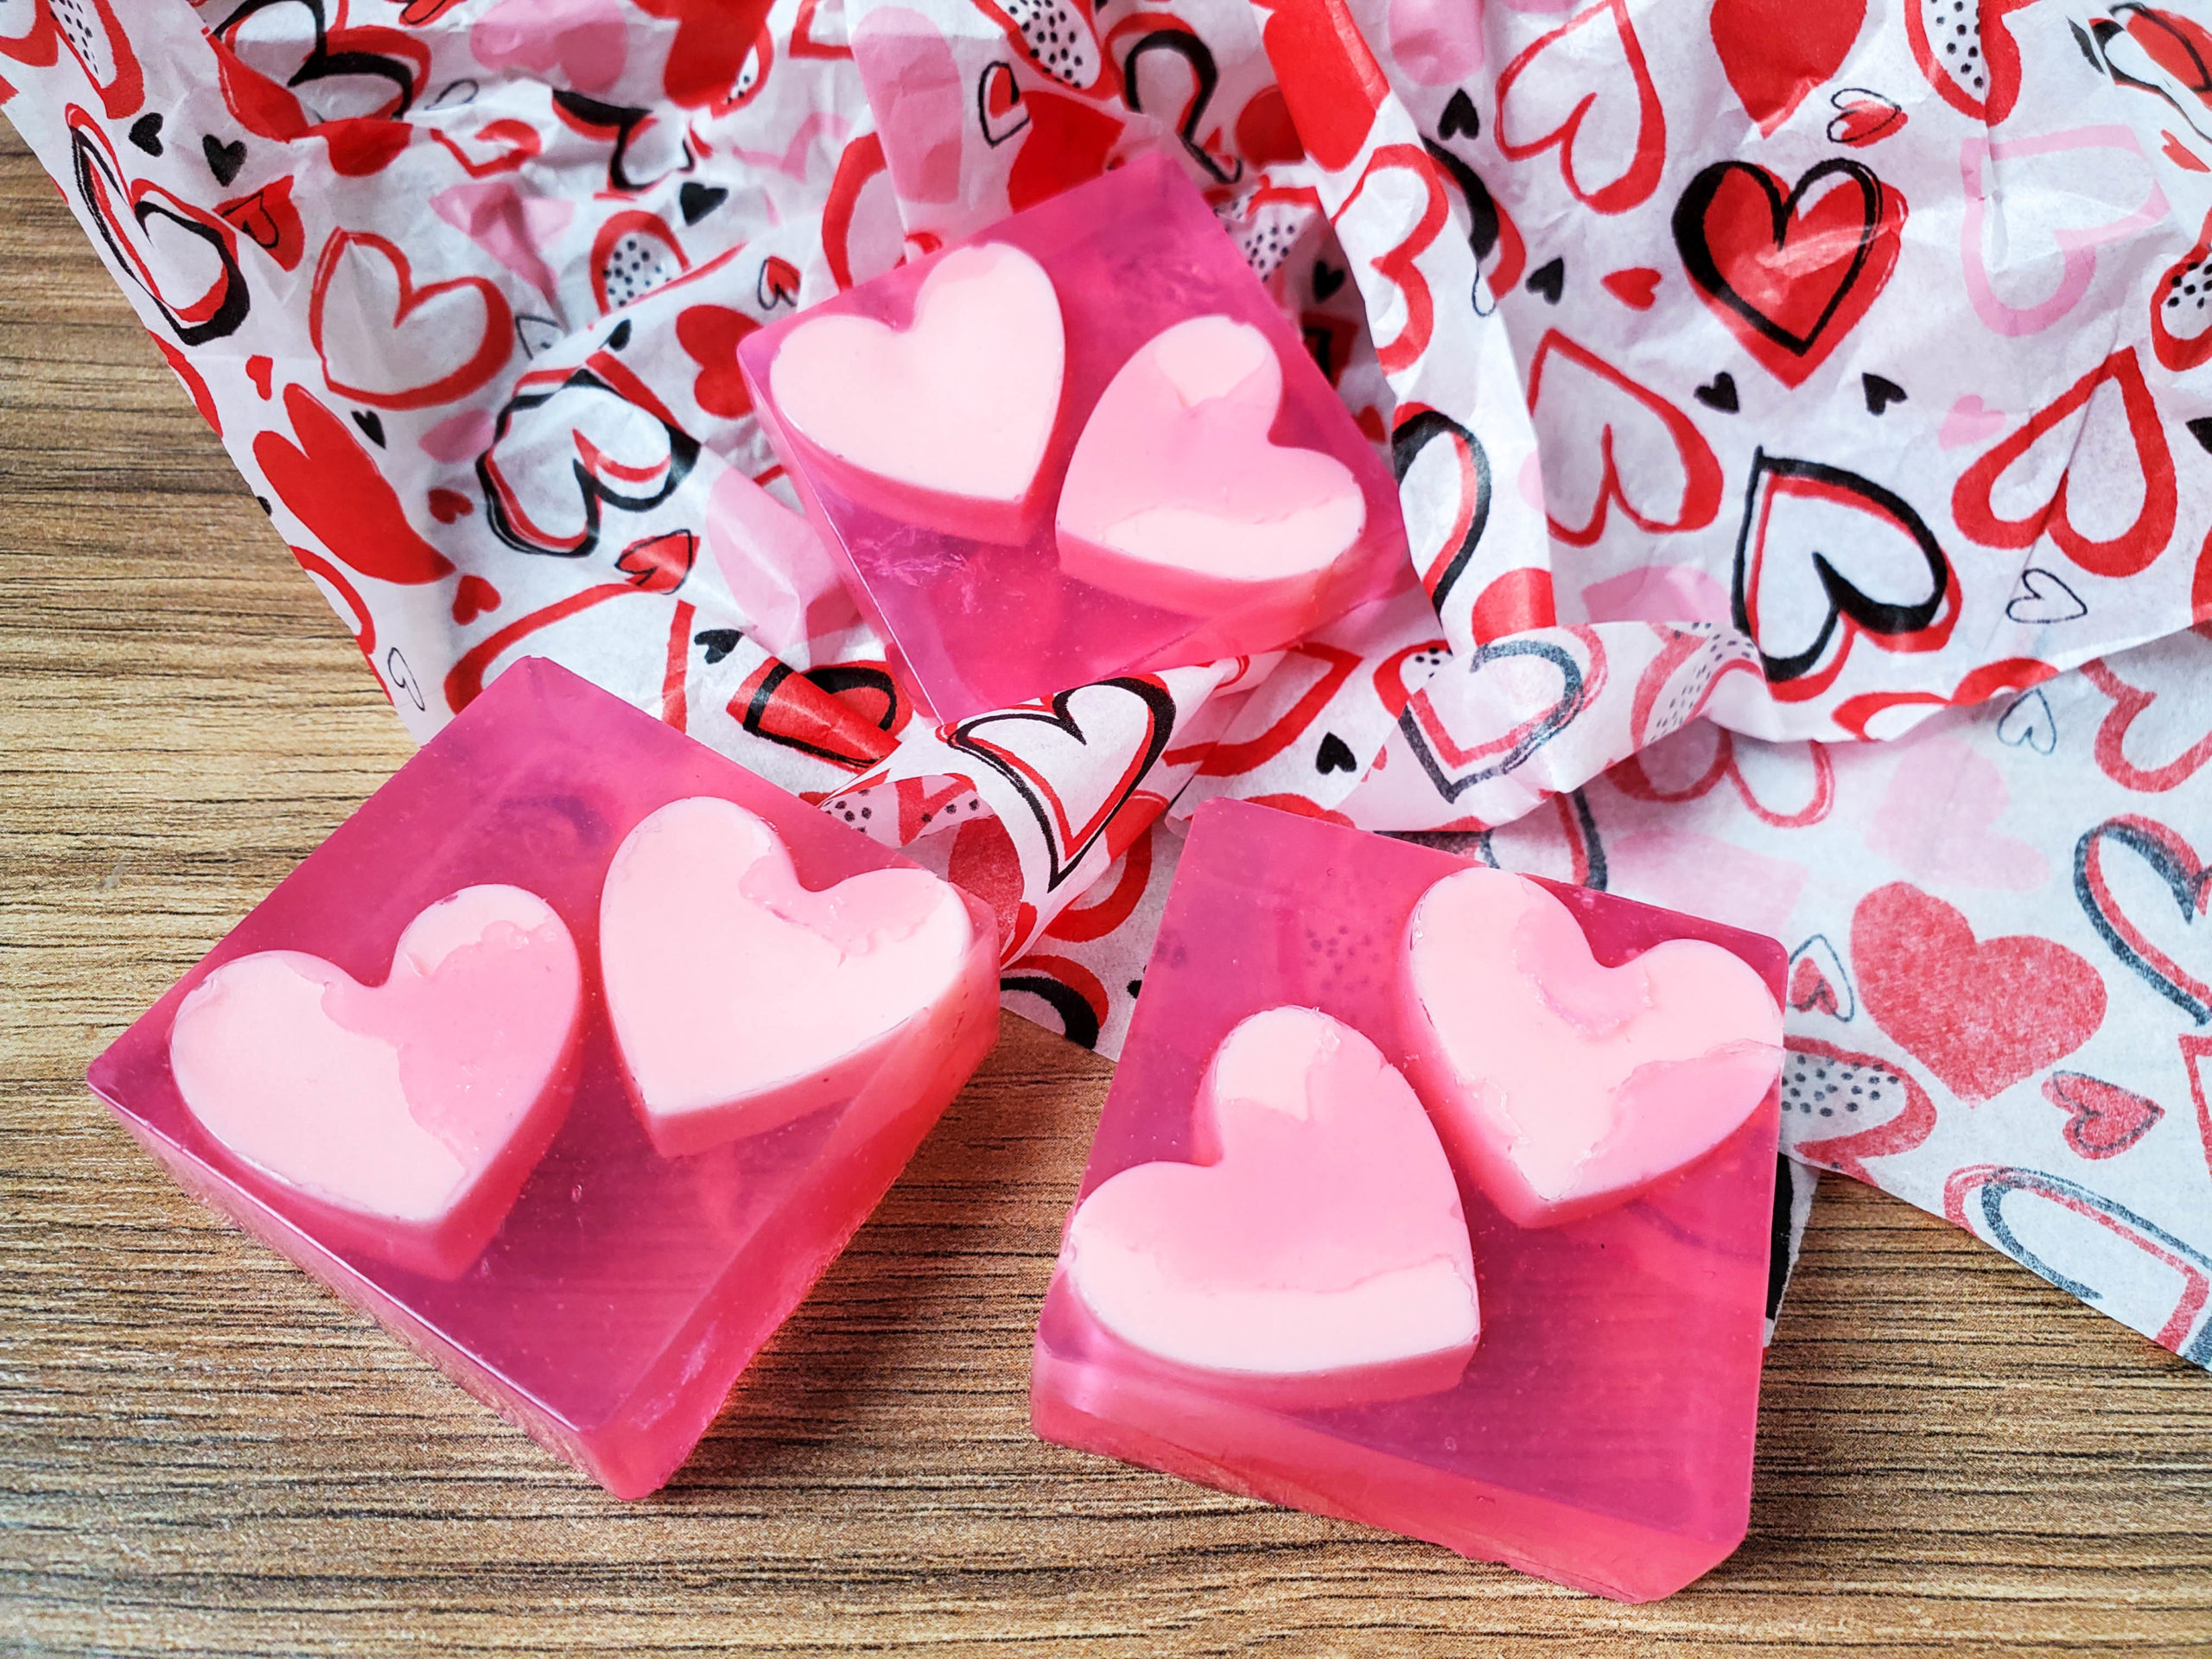 Coconut Valentine’s Soaps with Hearts